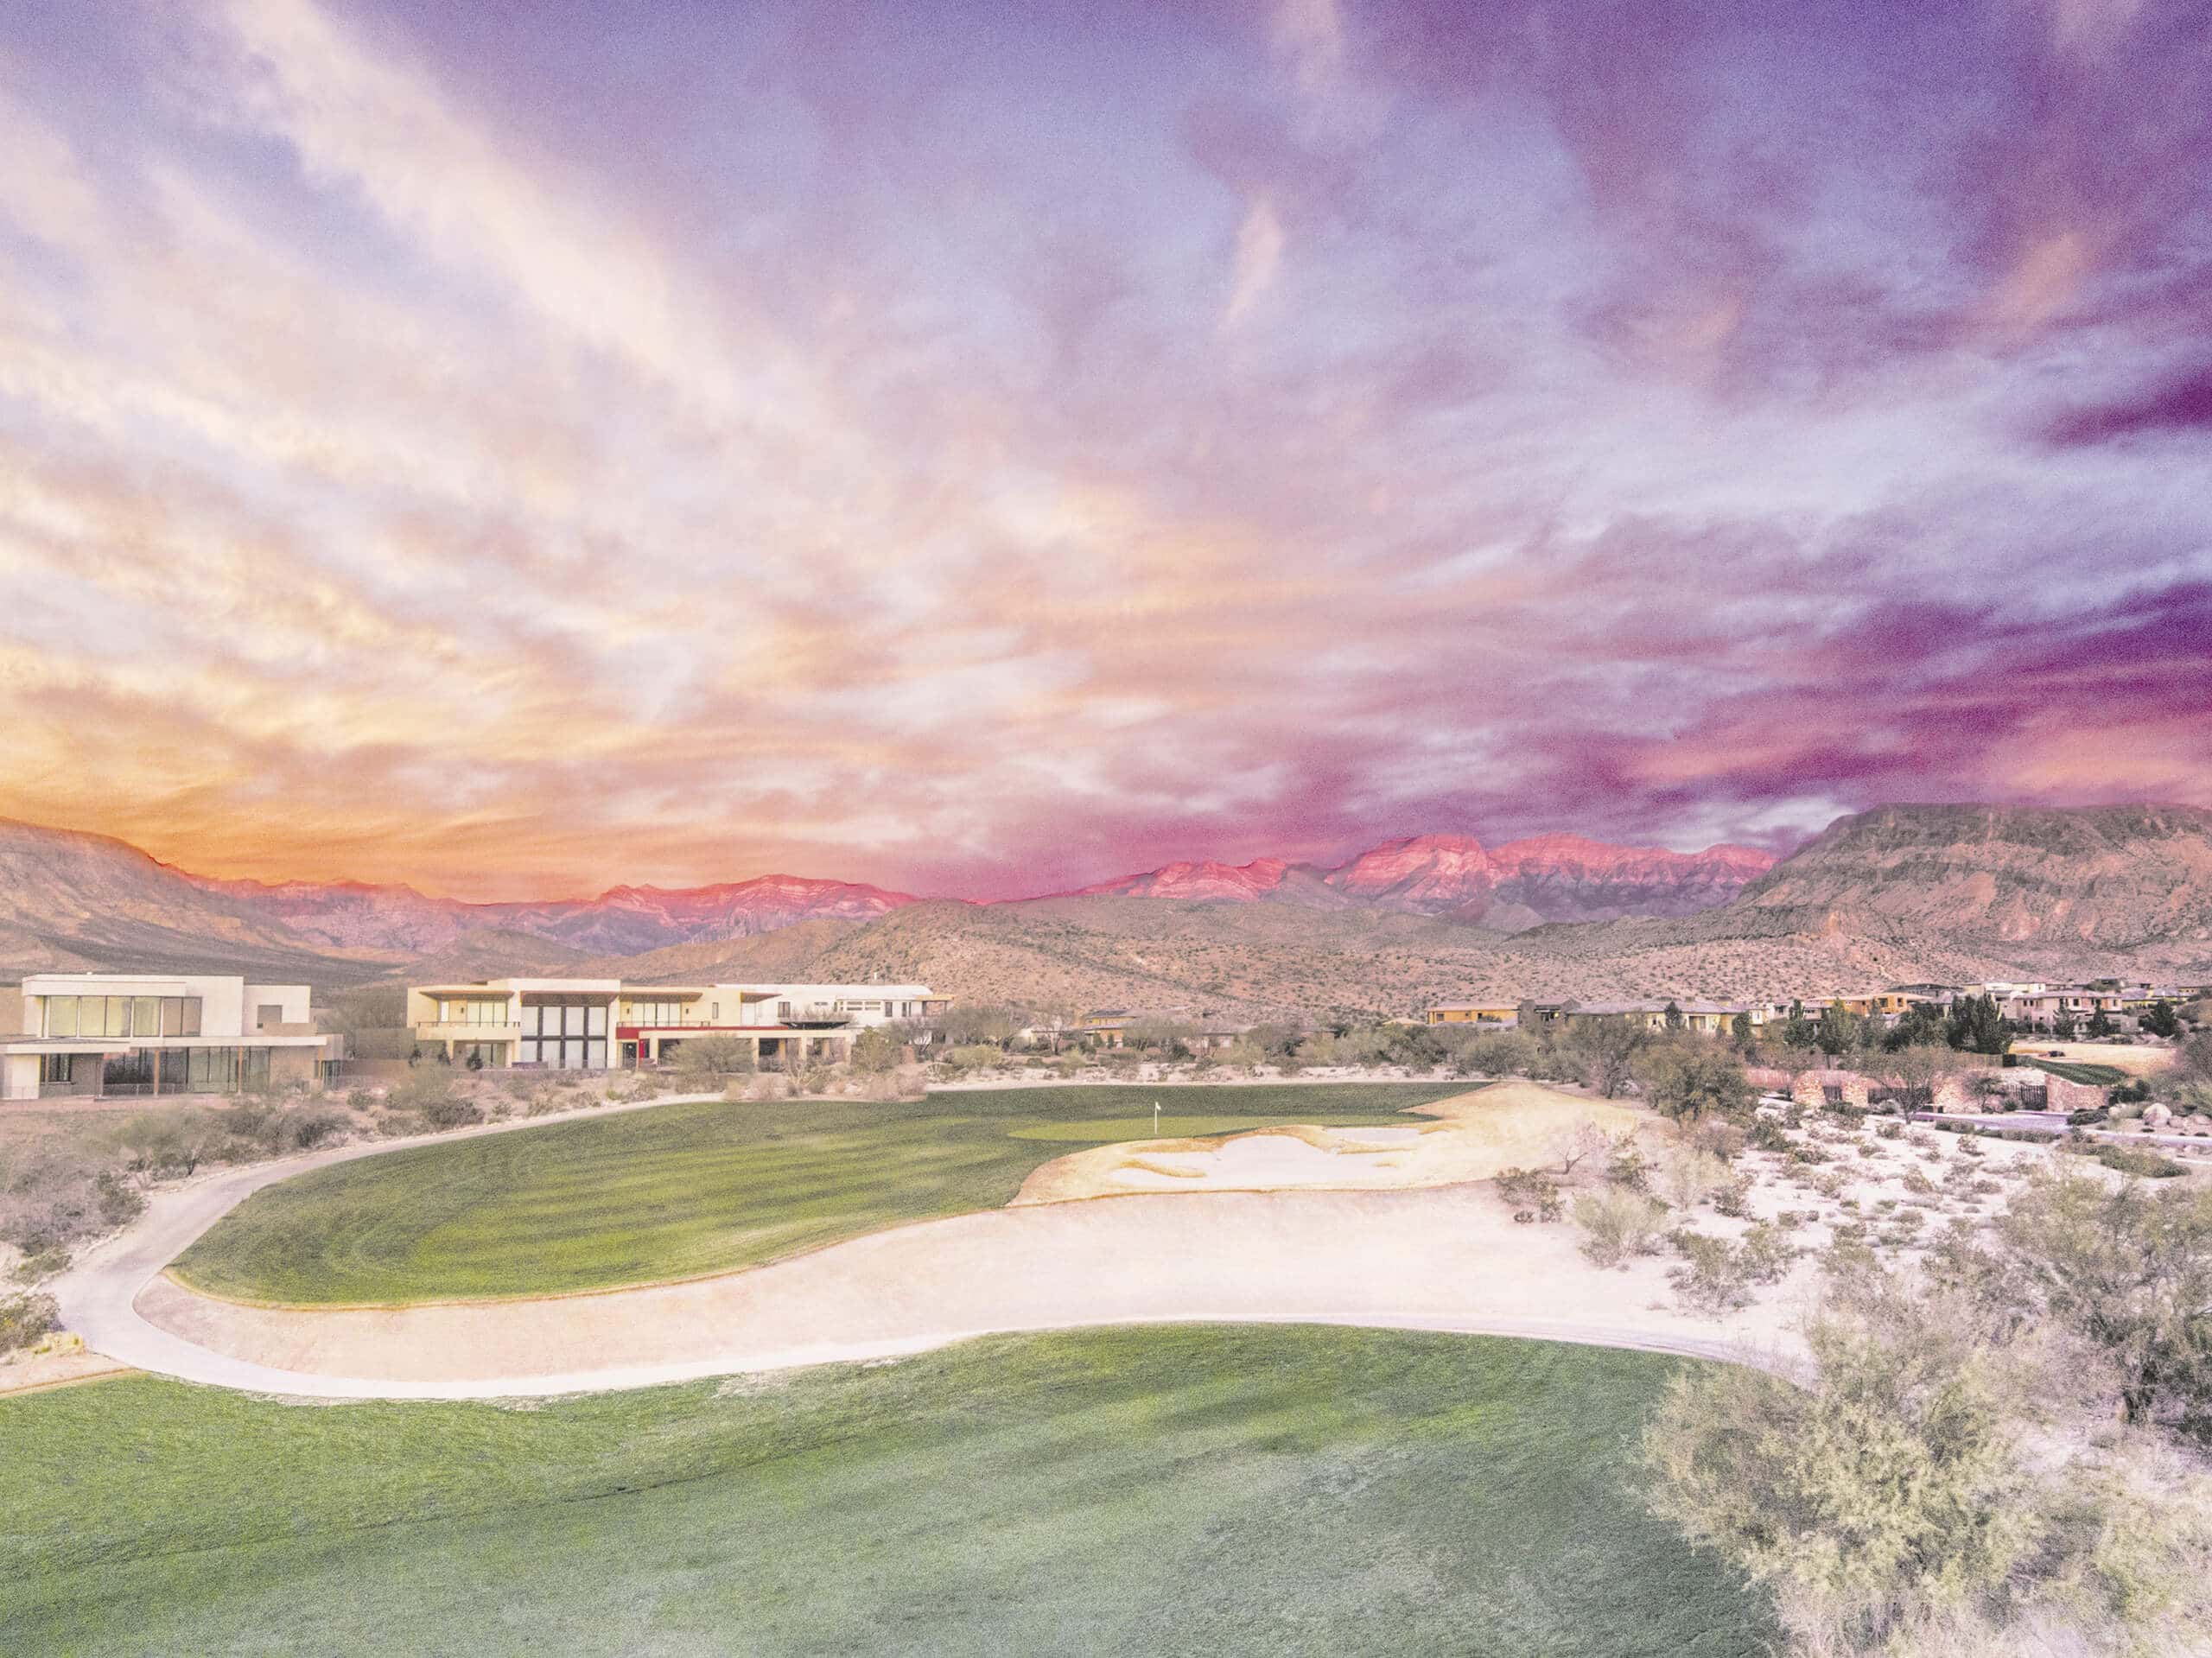 Summerlin is elegantly removed from the city and designed in harmony with the naturally dramatic and elevated topography of the Mohave Desert and the Spring Mountains.